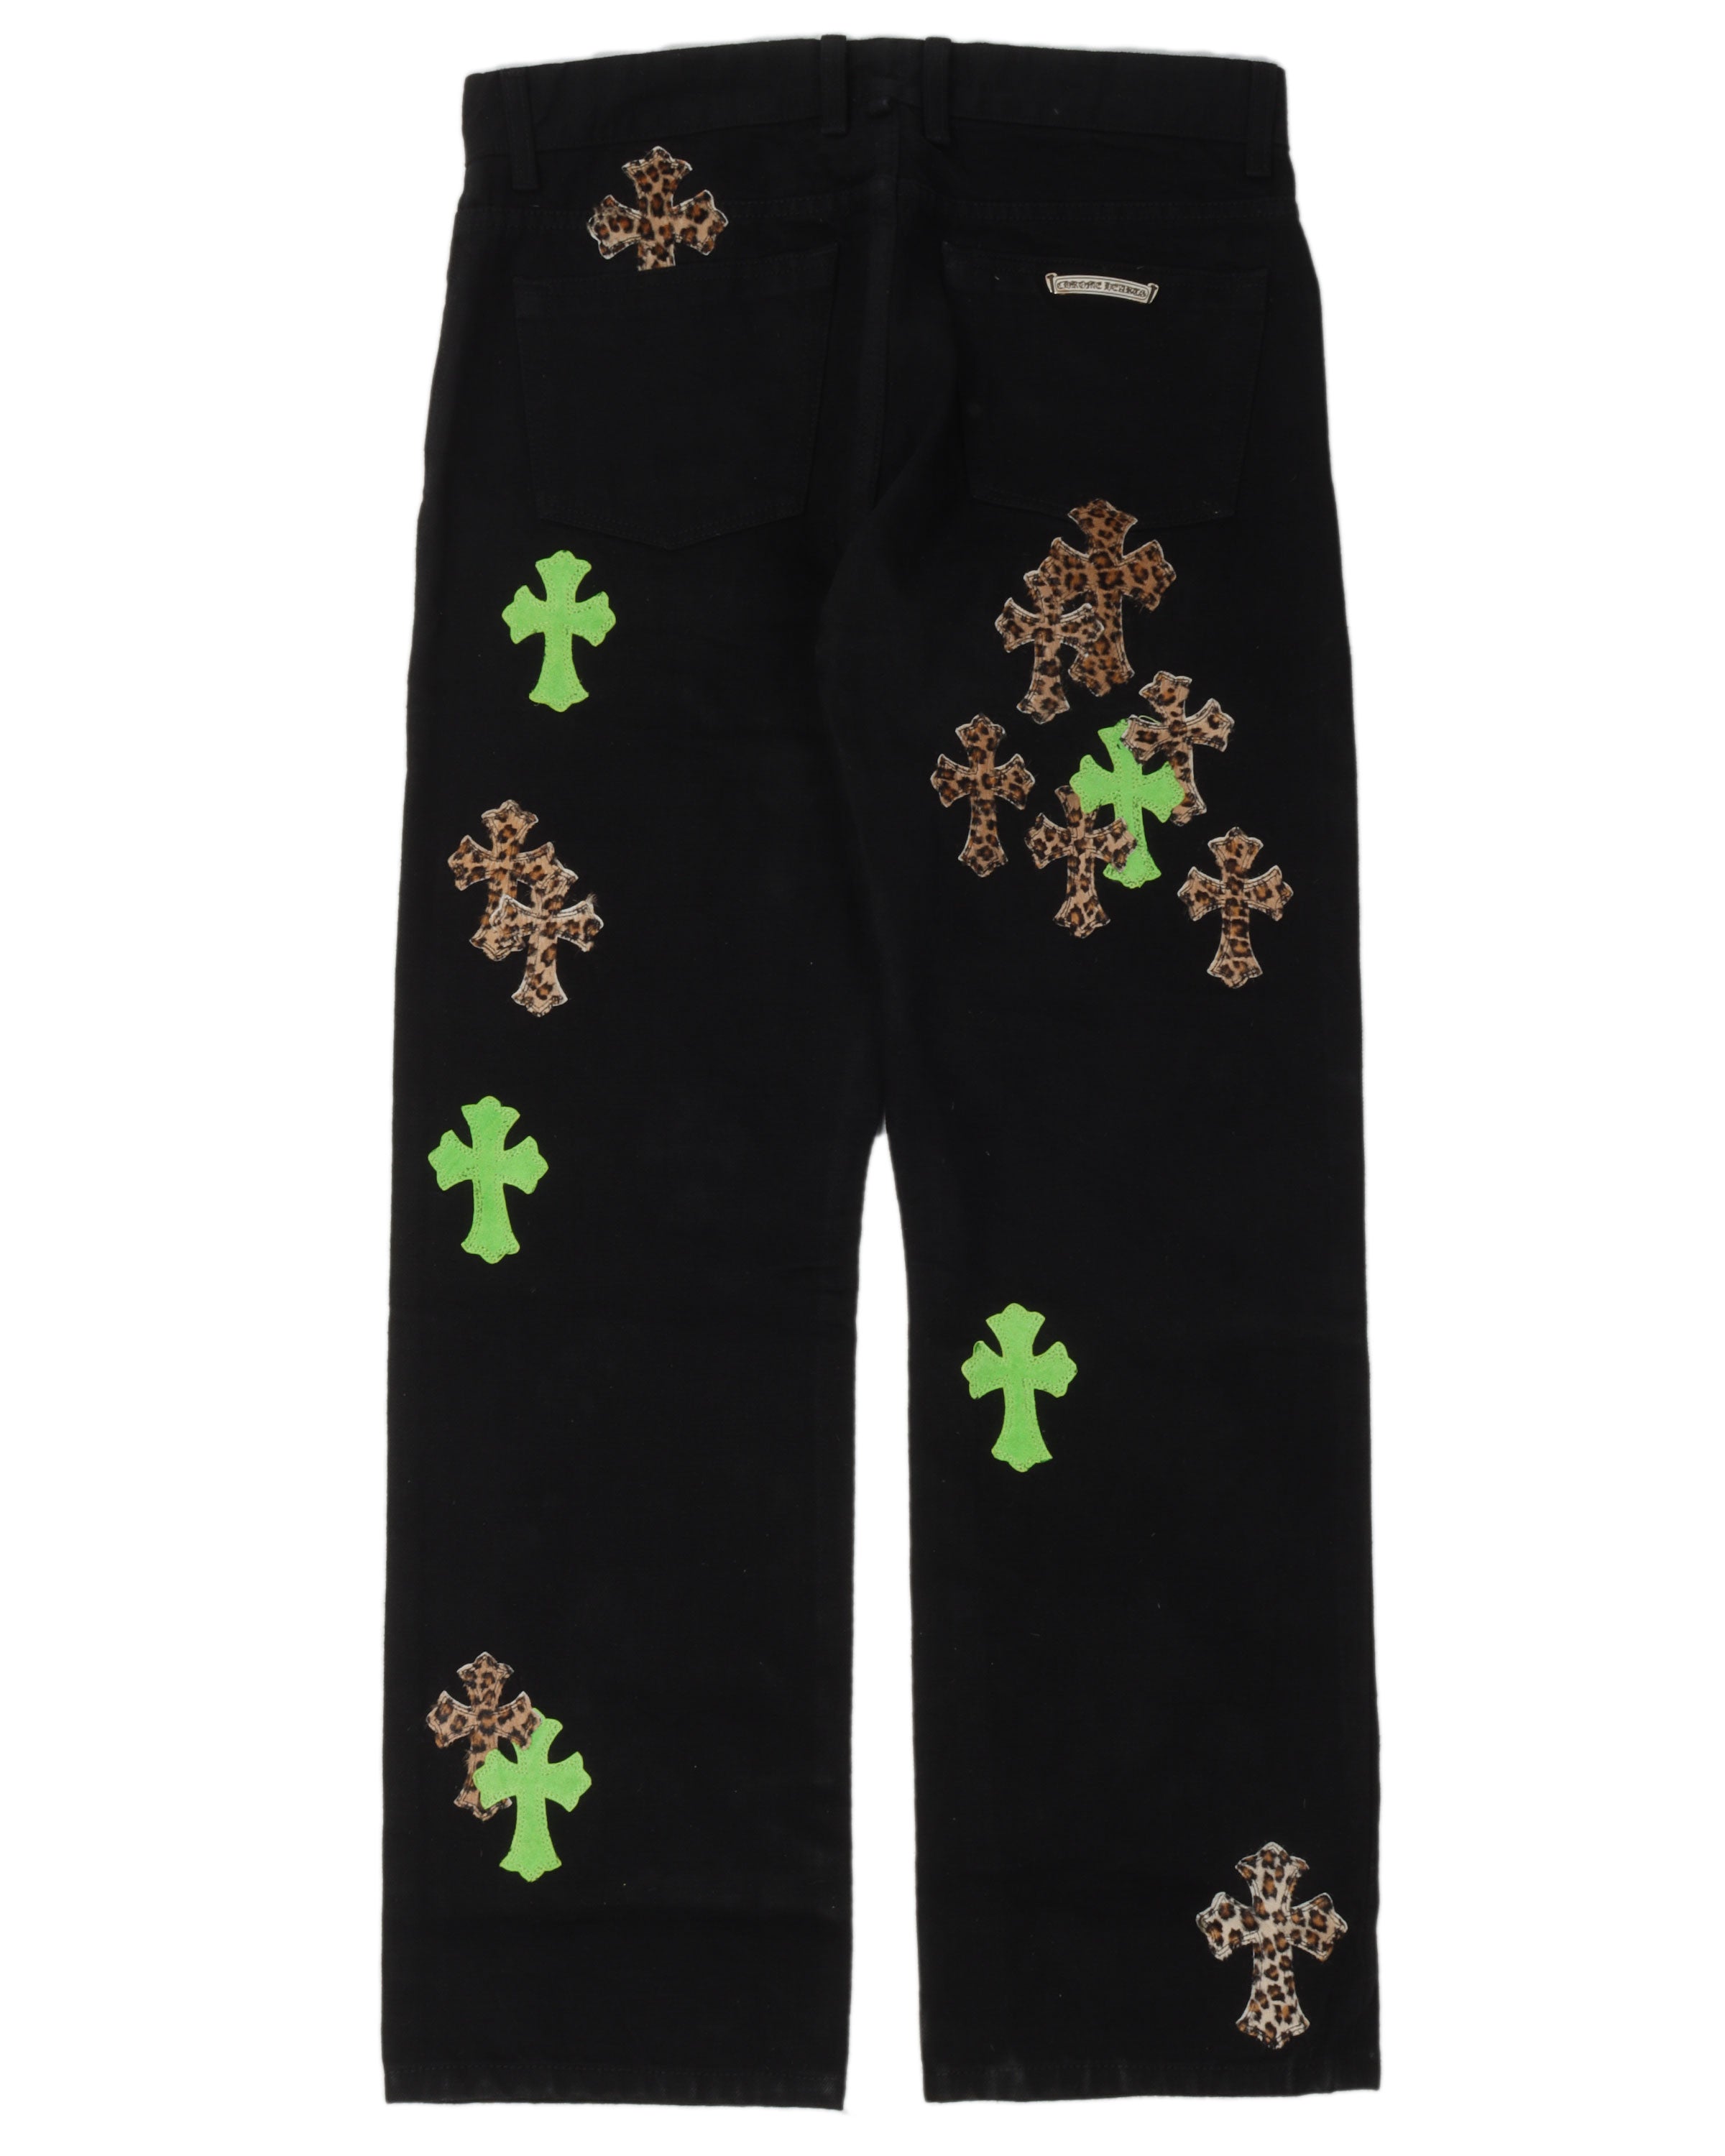 Chrome Hearts Checkered Cross Patch Jeans w/ 35 Cross Patches